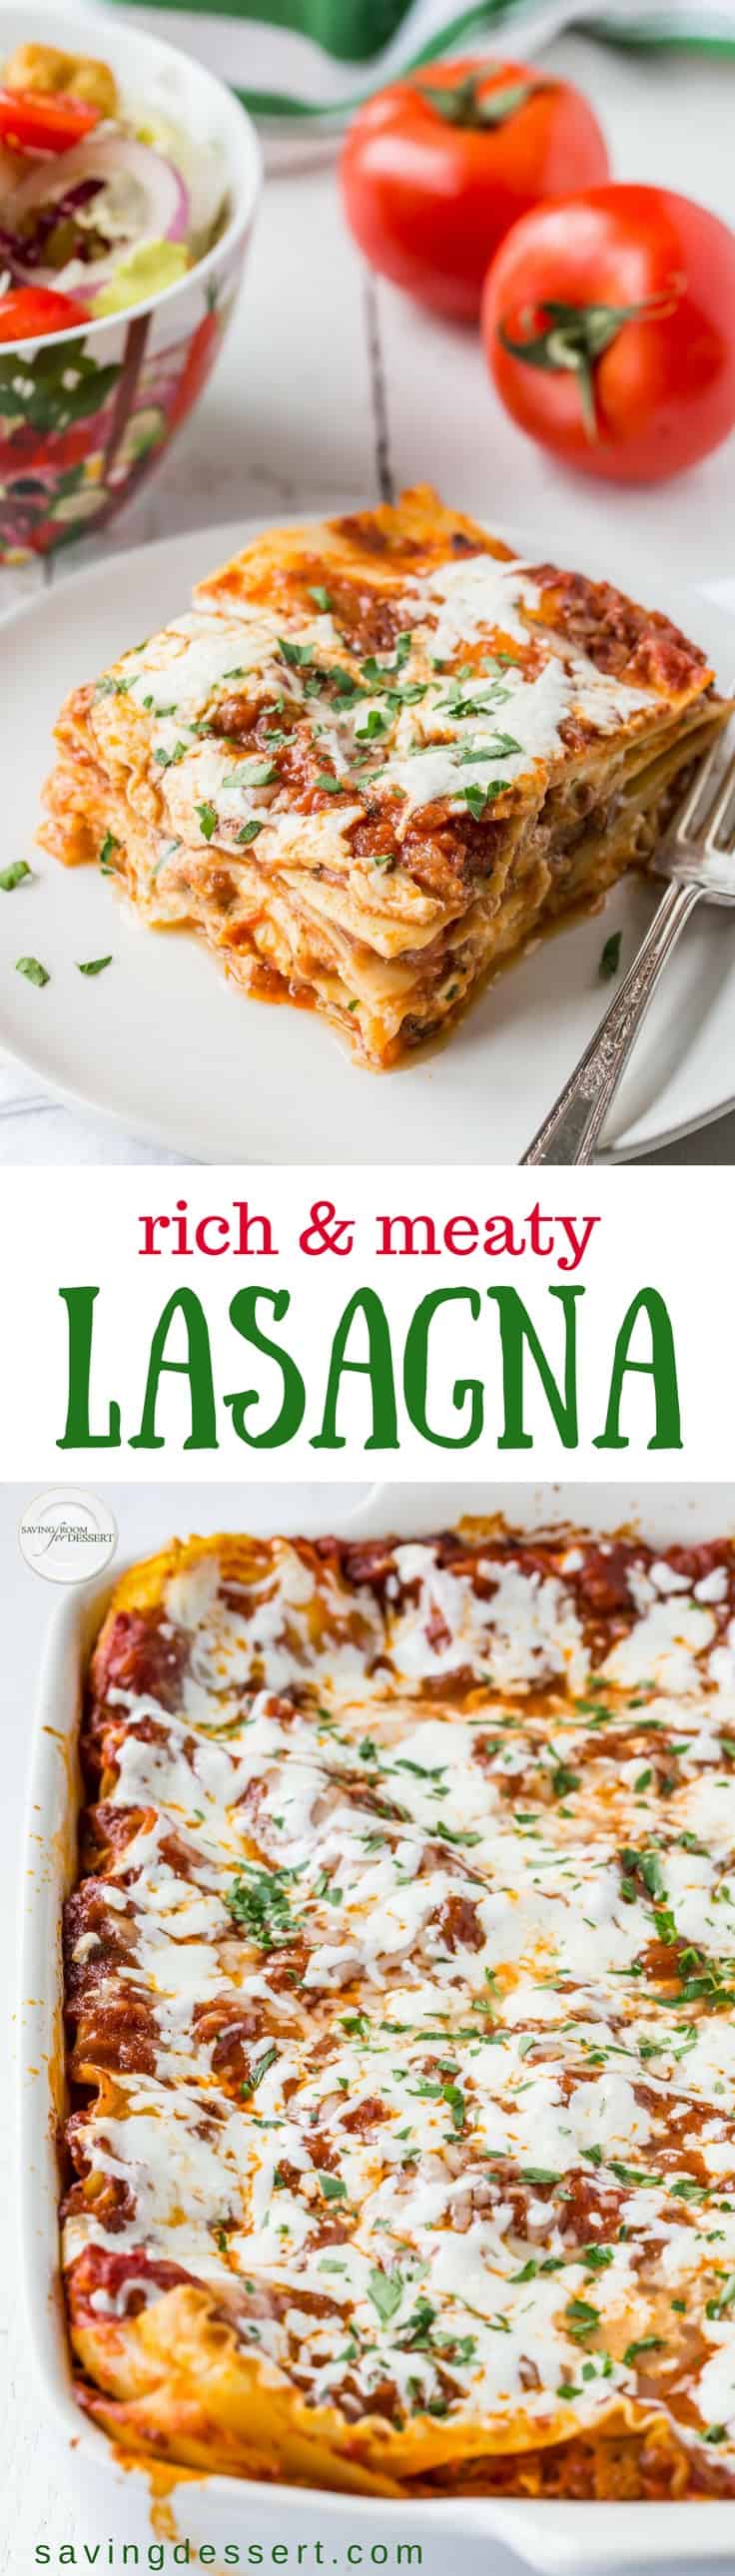 With our Rich & Meaty Classic Lasagna Recipe you'll be able to feed a small crowd or at least your super hungry family! With homemade meatballs, Italian sausage and plenty of cheesy goodness, this lasagna is worth every minute it takes to make! savingdessert.com #savingroomfordessert #lasagna #homemadelasagna #meatylasagna #meatballs #italian #classiclasagna #feedacrowd #dinnerpartyrecipe #comfortfood 